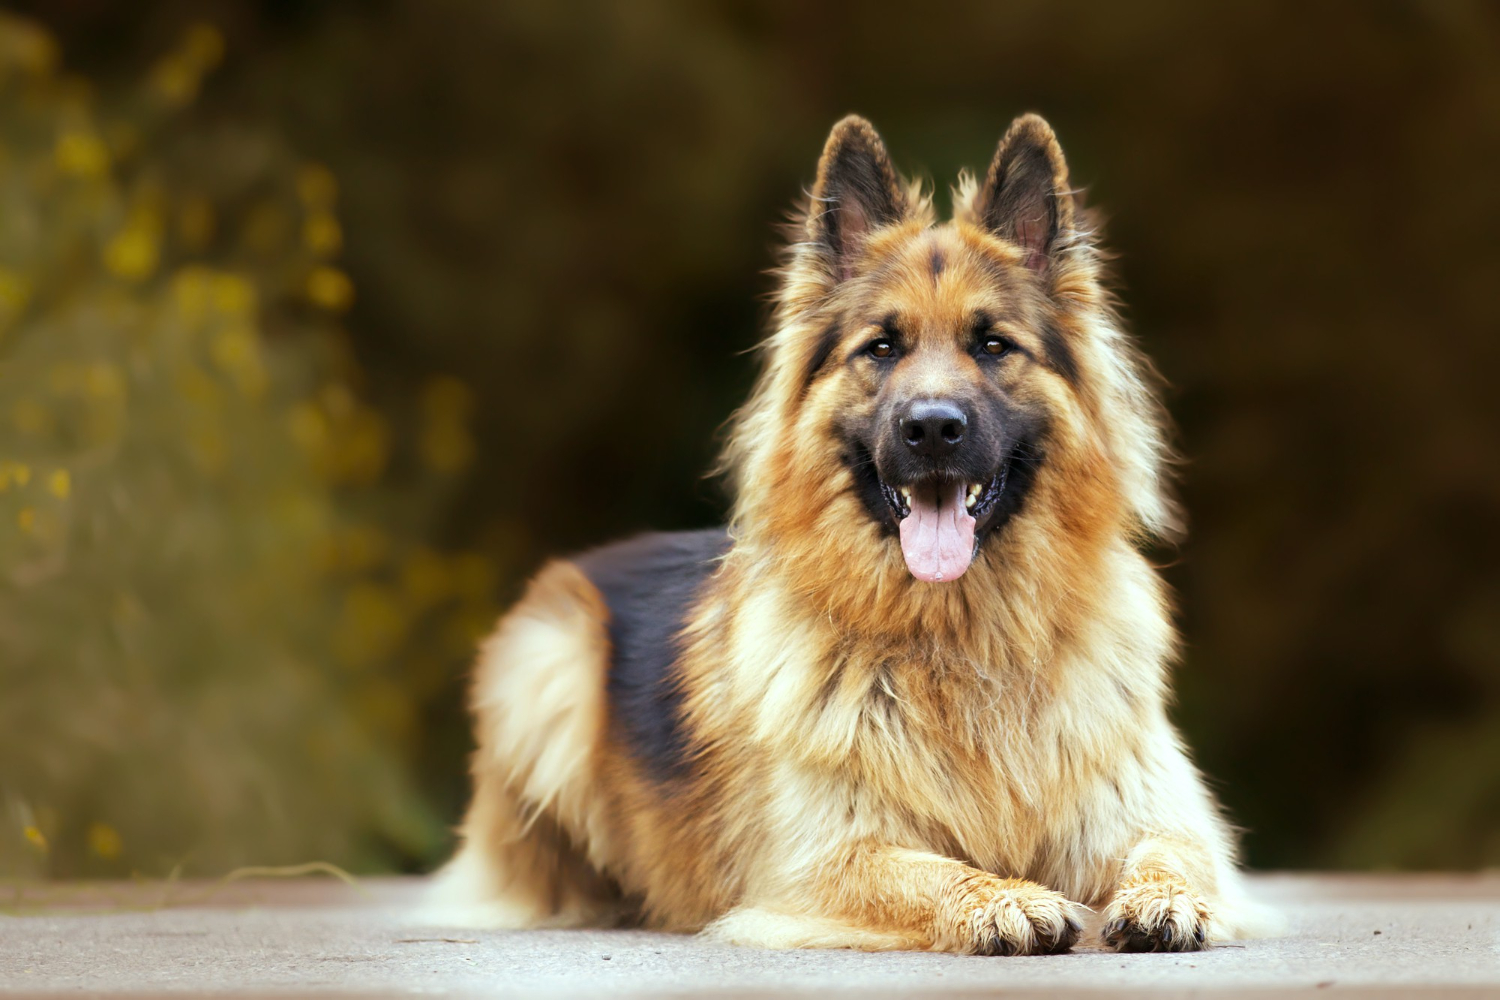 "How to Ensure a Harmonious Household by Introducing a German Shepherd to Other Pets"